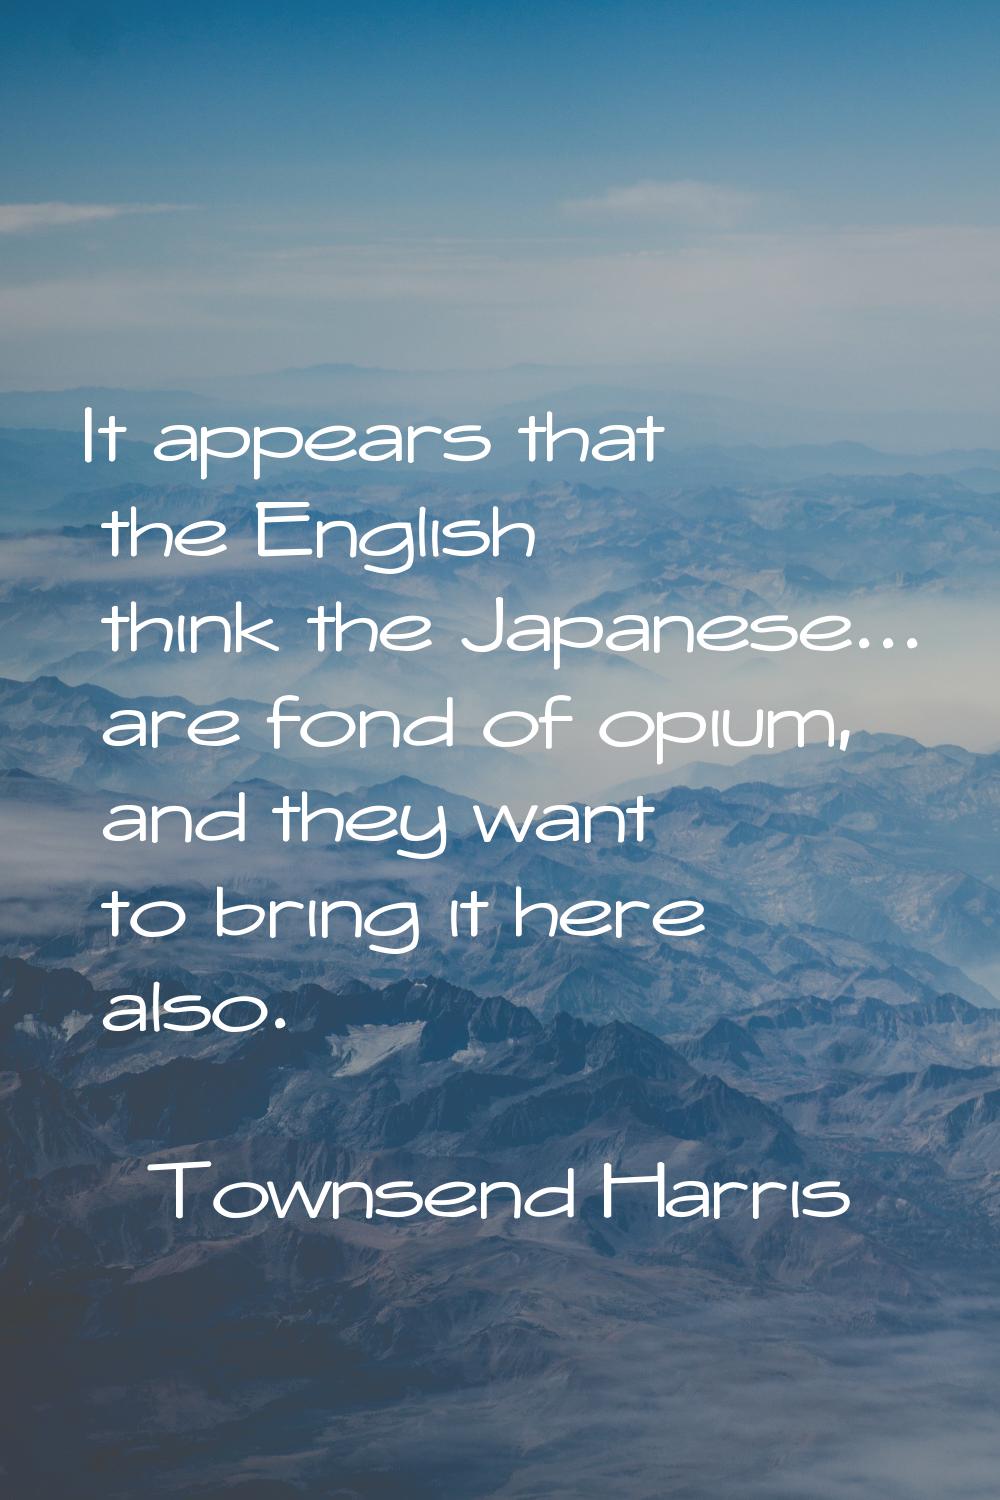 It appears that the English think the Japanese... are fond of opium, and they want to bring it here